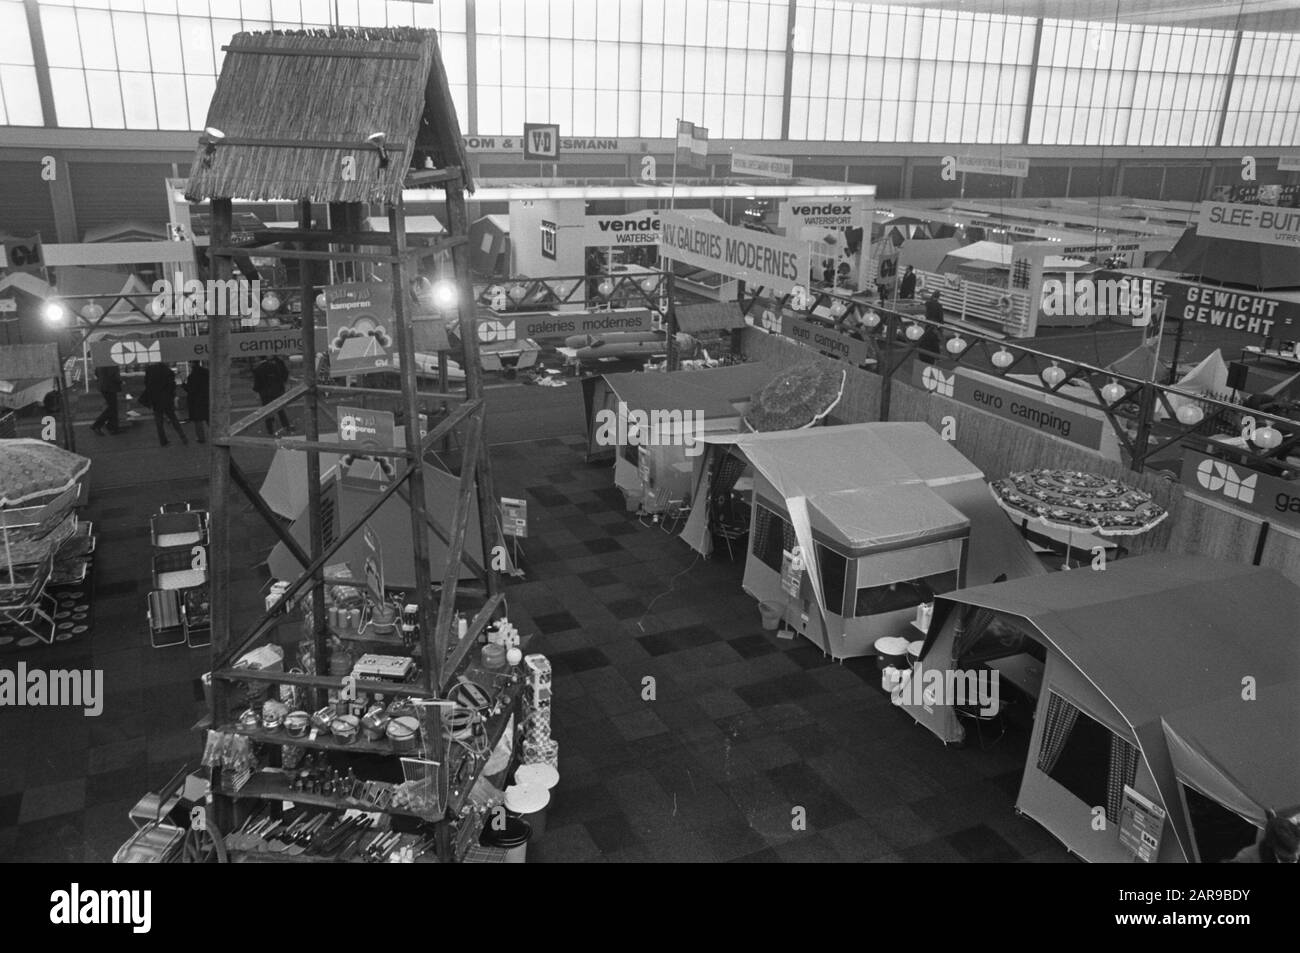 Fifteenth HISWA in RAI Amsterdam. Preparations. Overview exhibition Date: March 12, 1970 Location: Amsterdam, Noord-Holland Institution name: HISWA Stock Photo